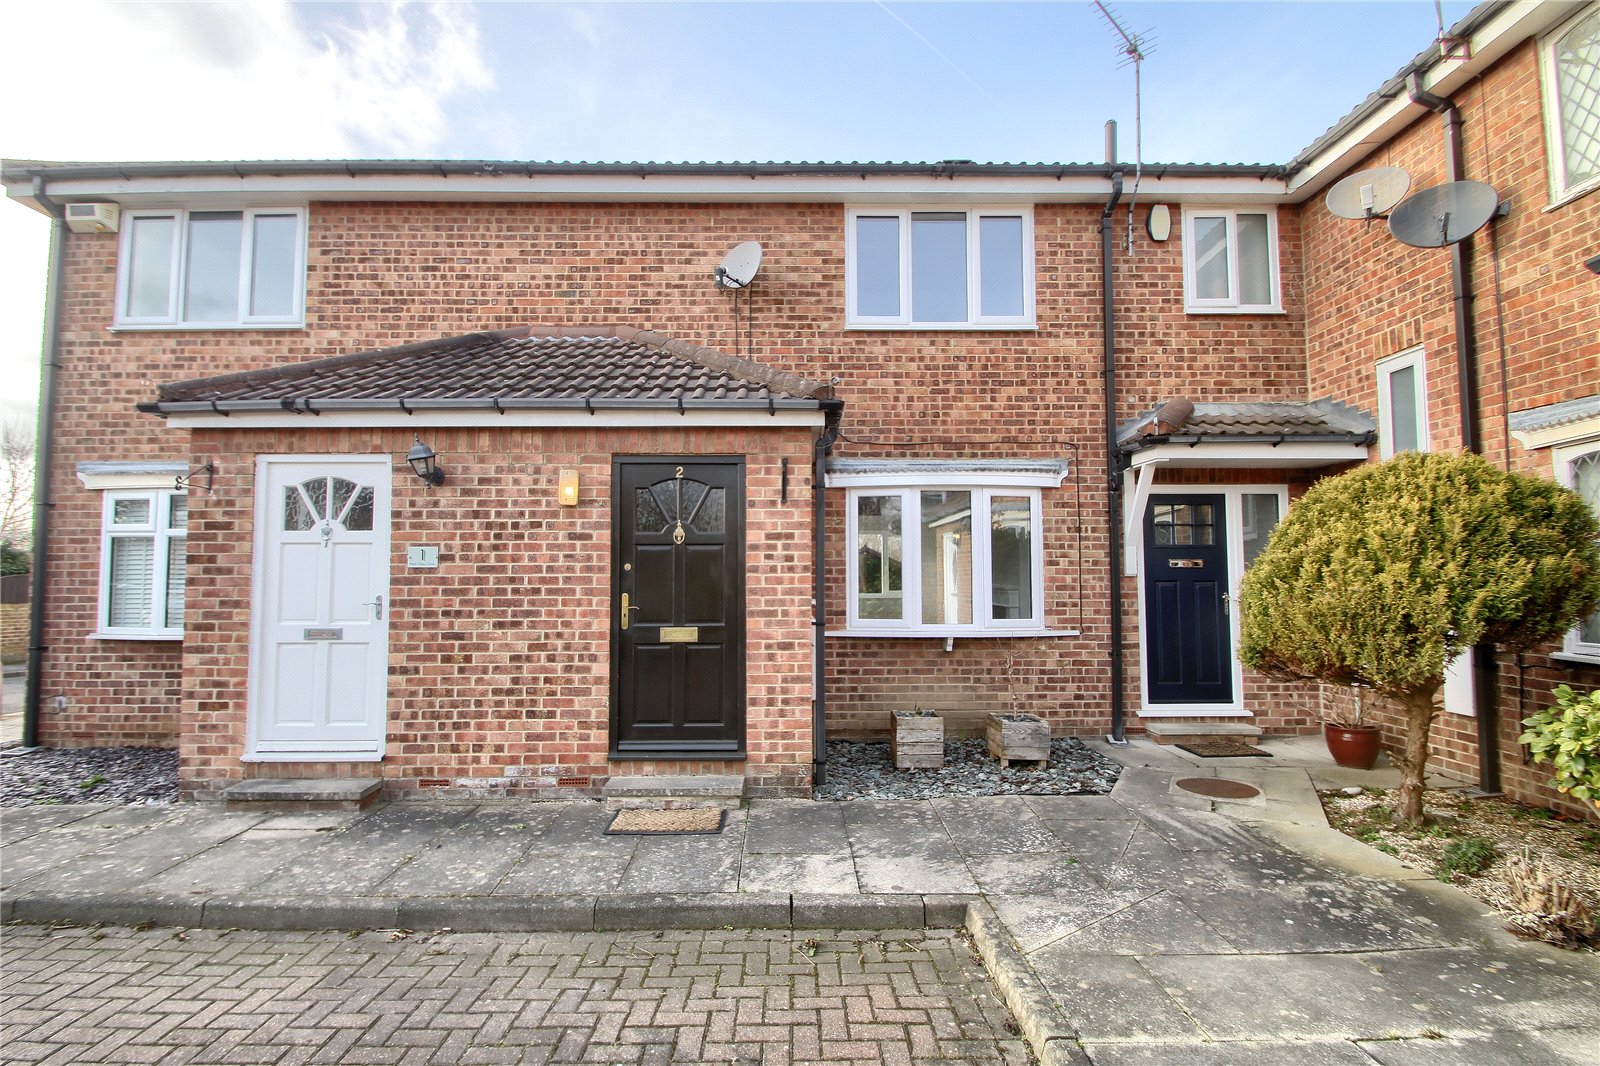 2 bed house to rent in West View Close, Eaglescliffe - Property Image 1